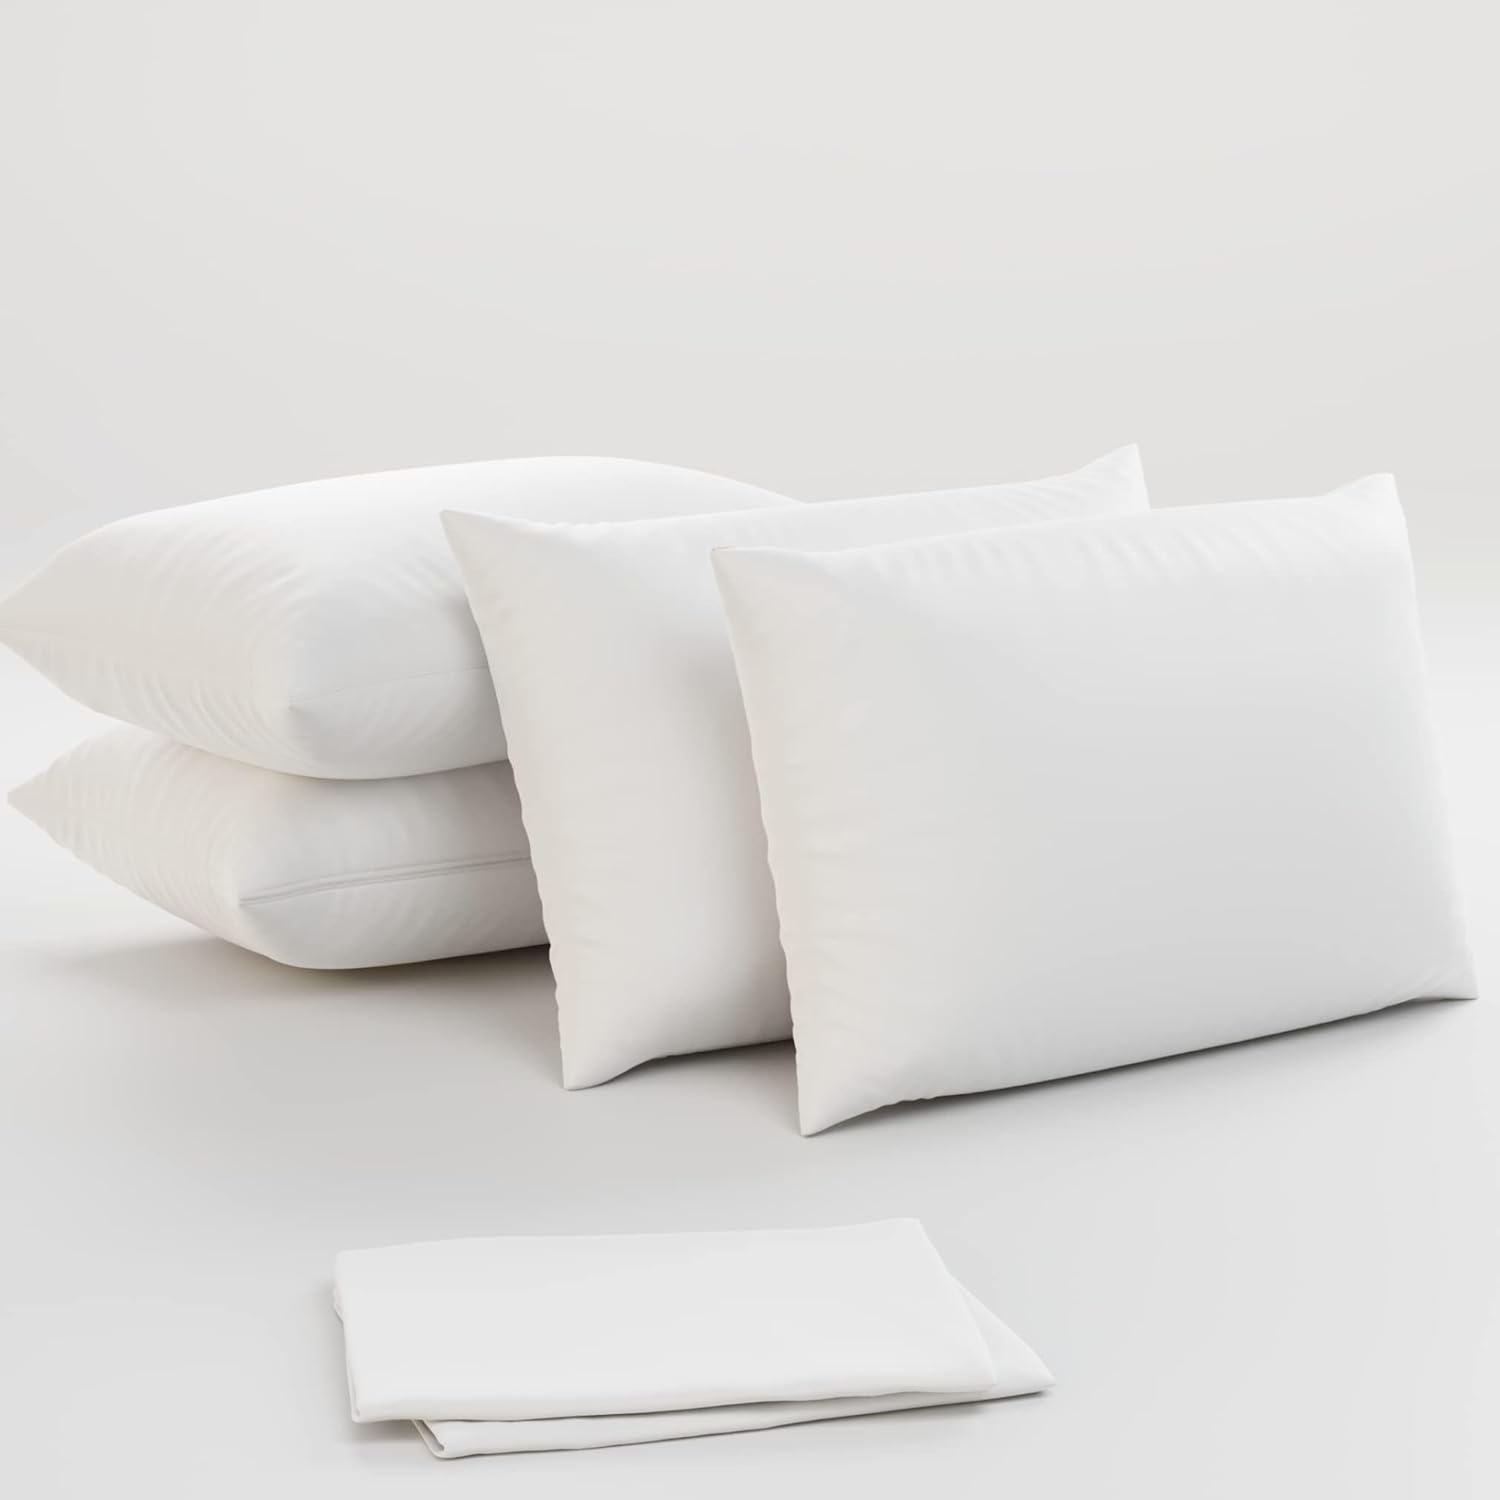 4 Pack Pillow Protectors Queen 20x30 Inches Lab Certified Ultra Fresh Treated 100% Cotton Non Crinkle Quiet Breathable Zipper Covers Cases White